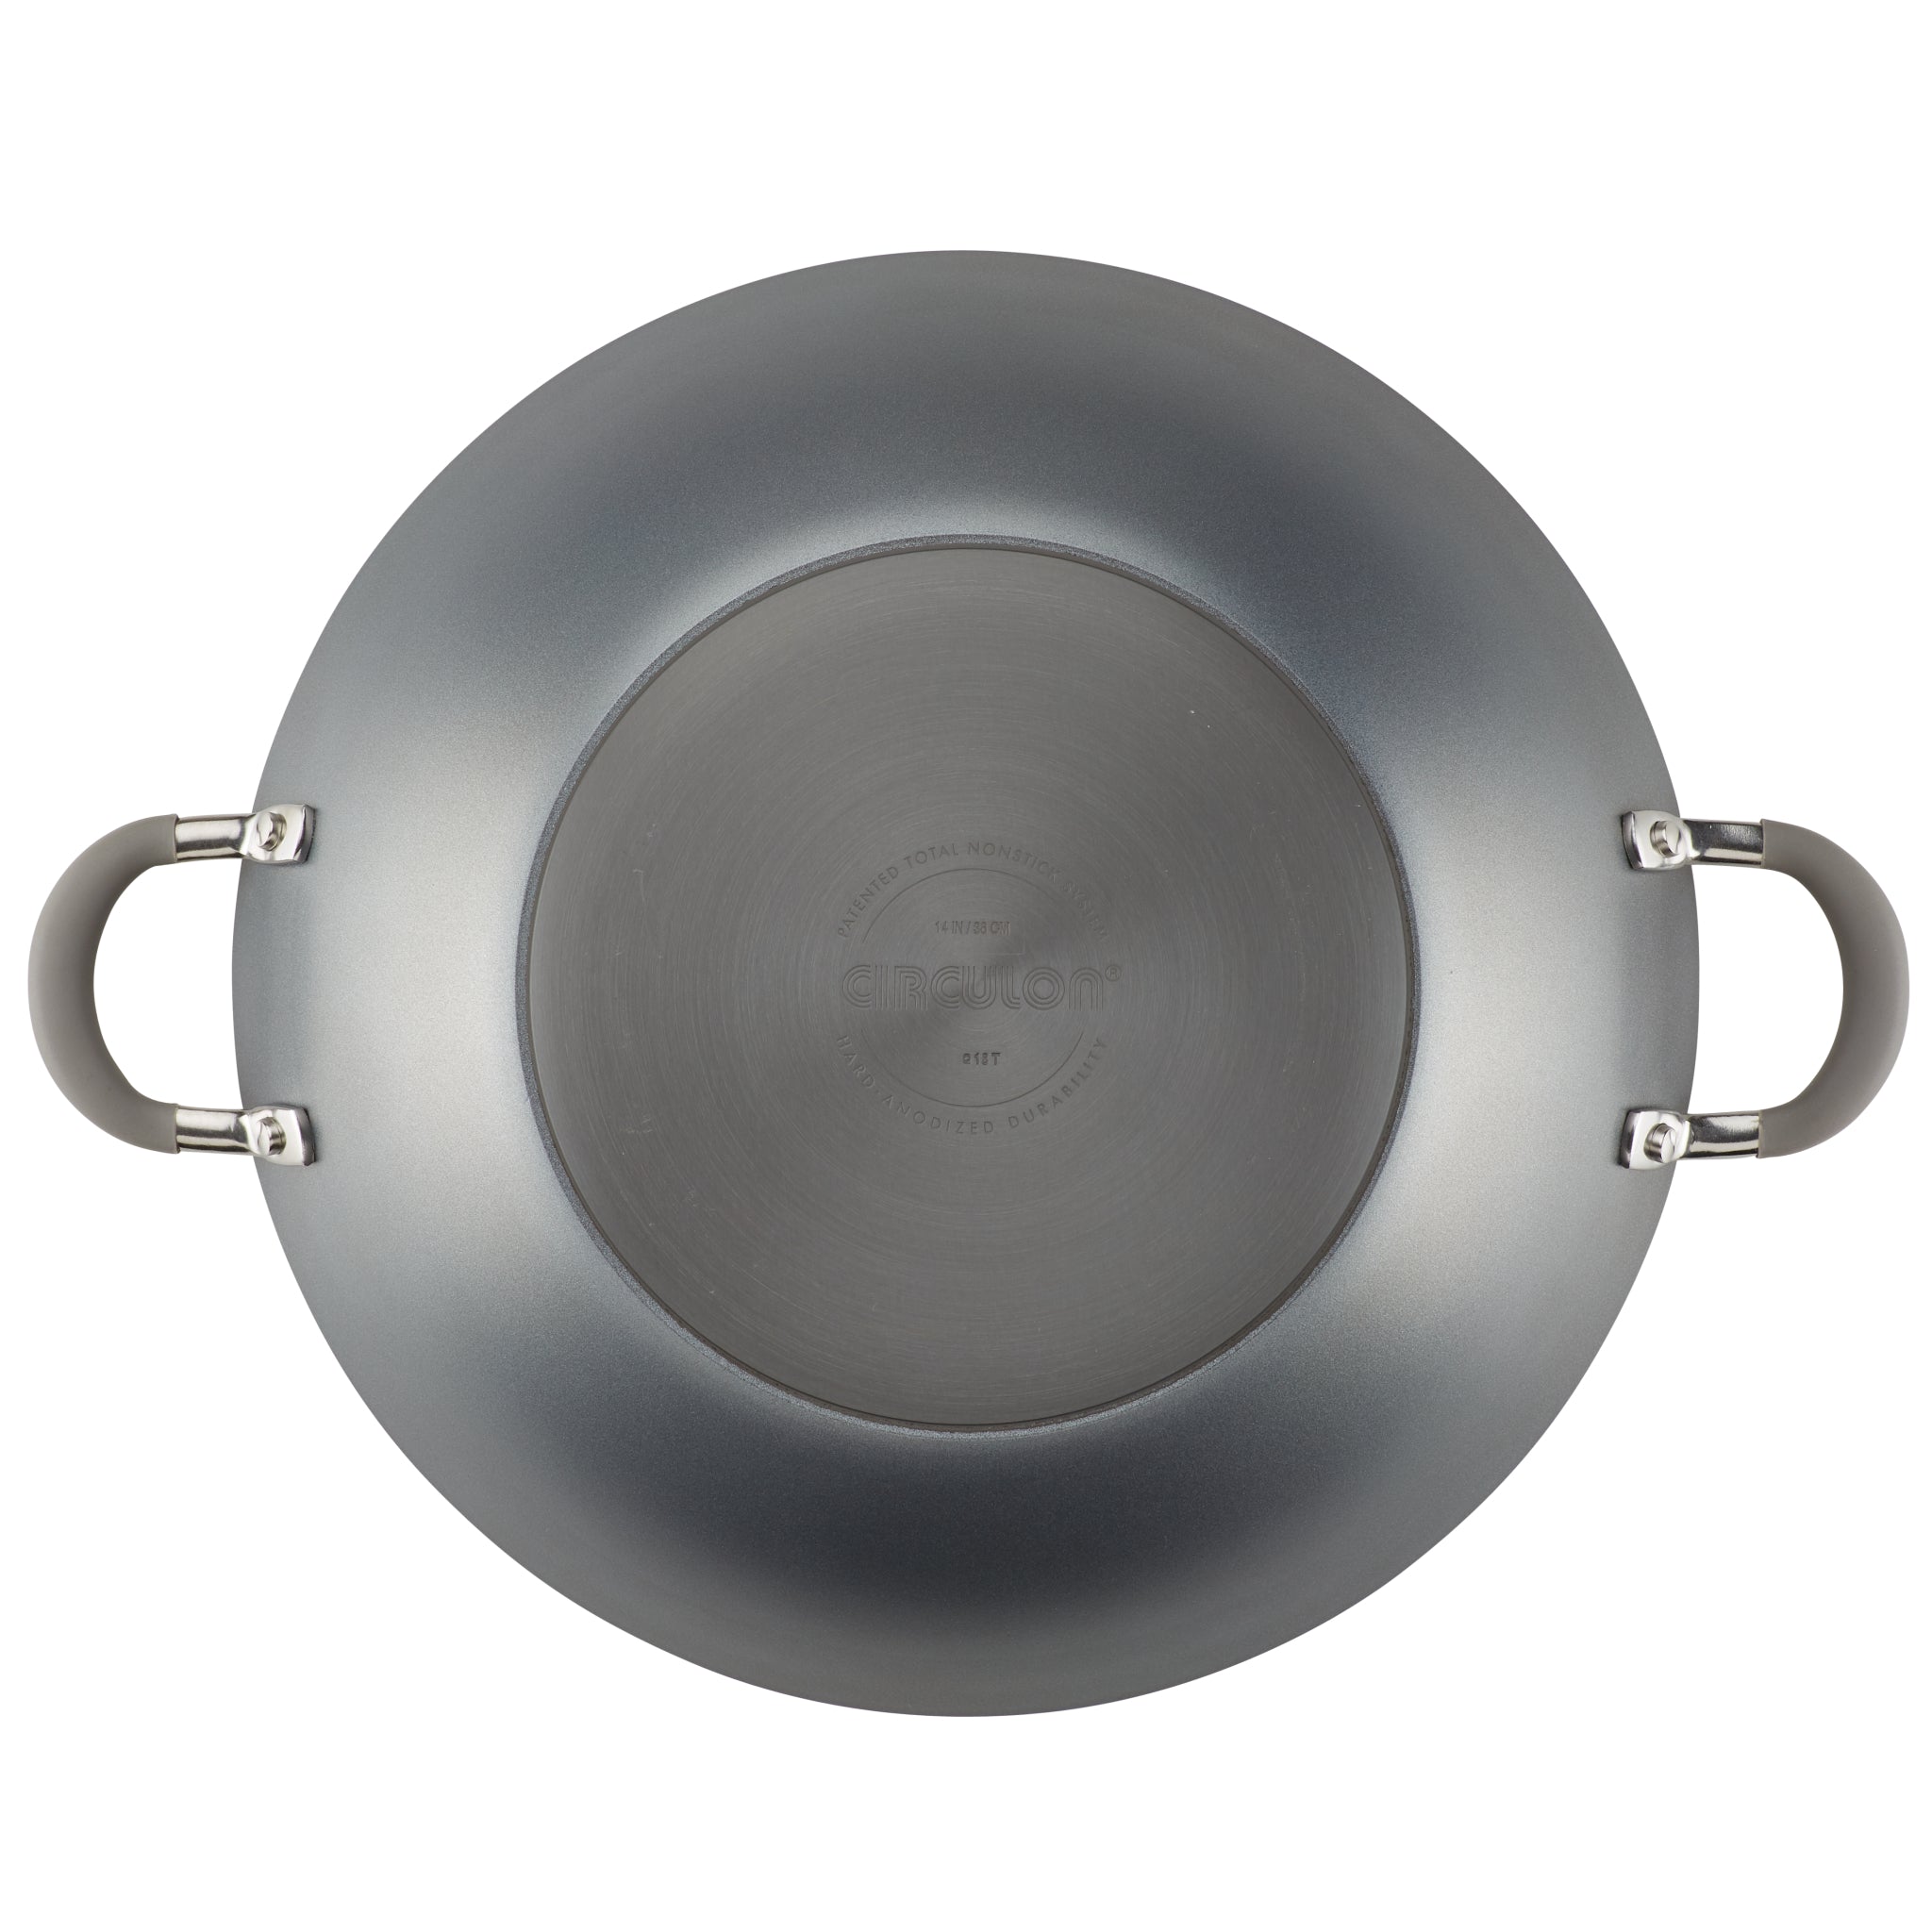 Nonstick Hard Anodized 14-Inch Nonstick Frying Pan